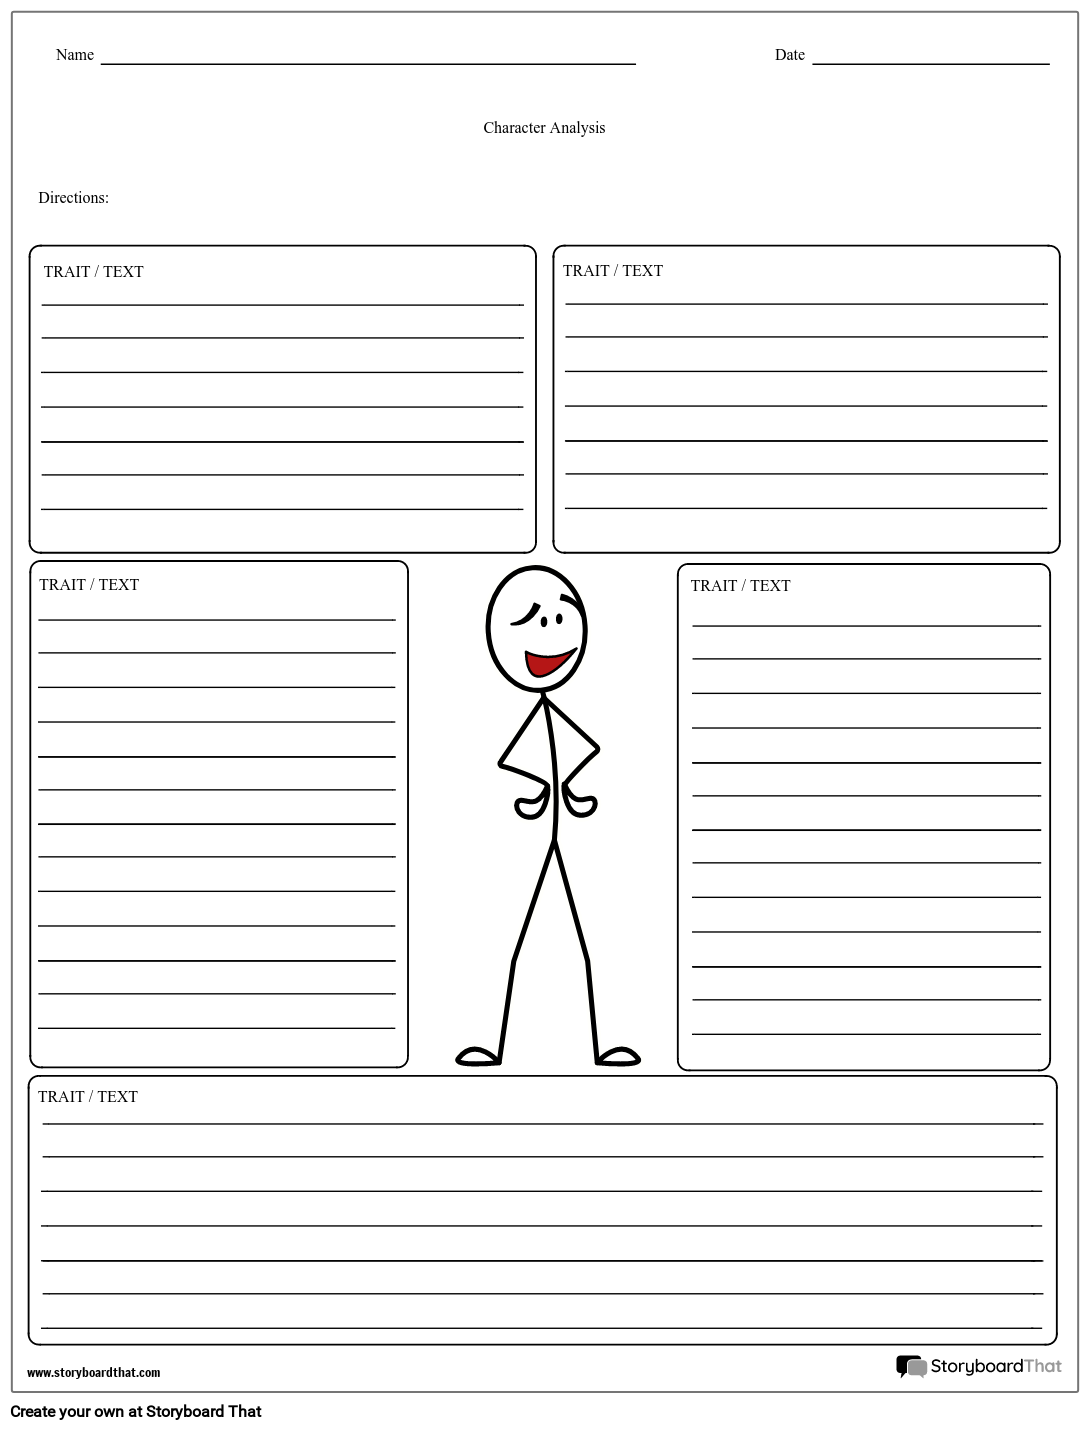 create-a-character-analysis-worksheet-character-analysis-template